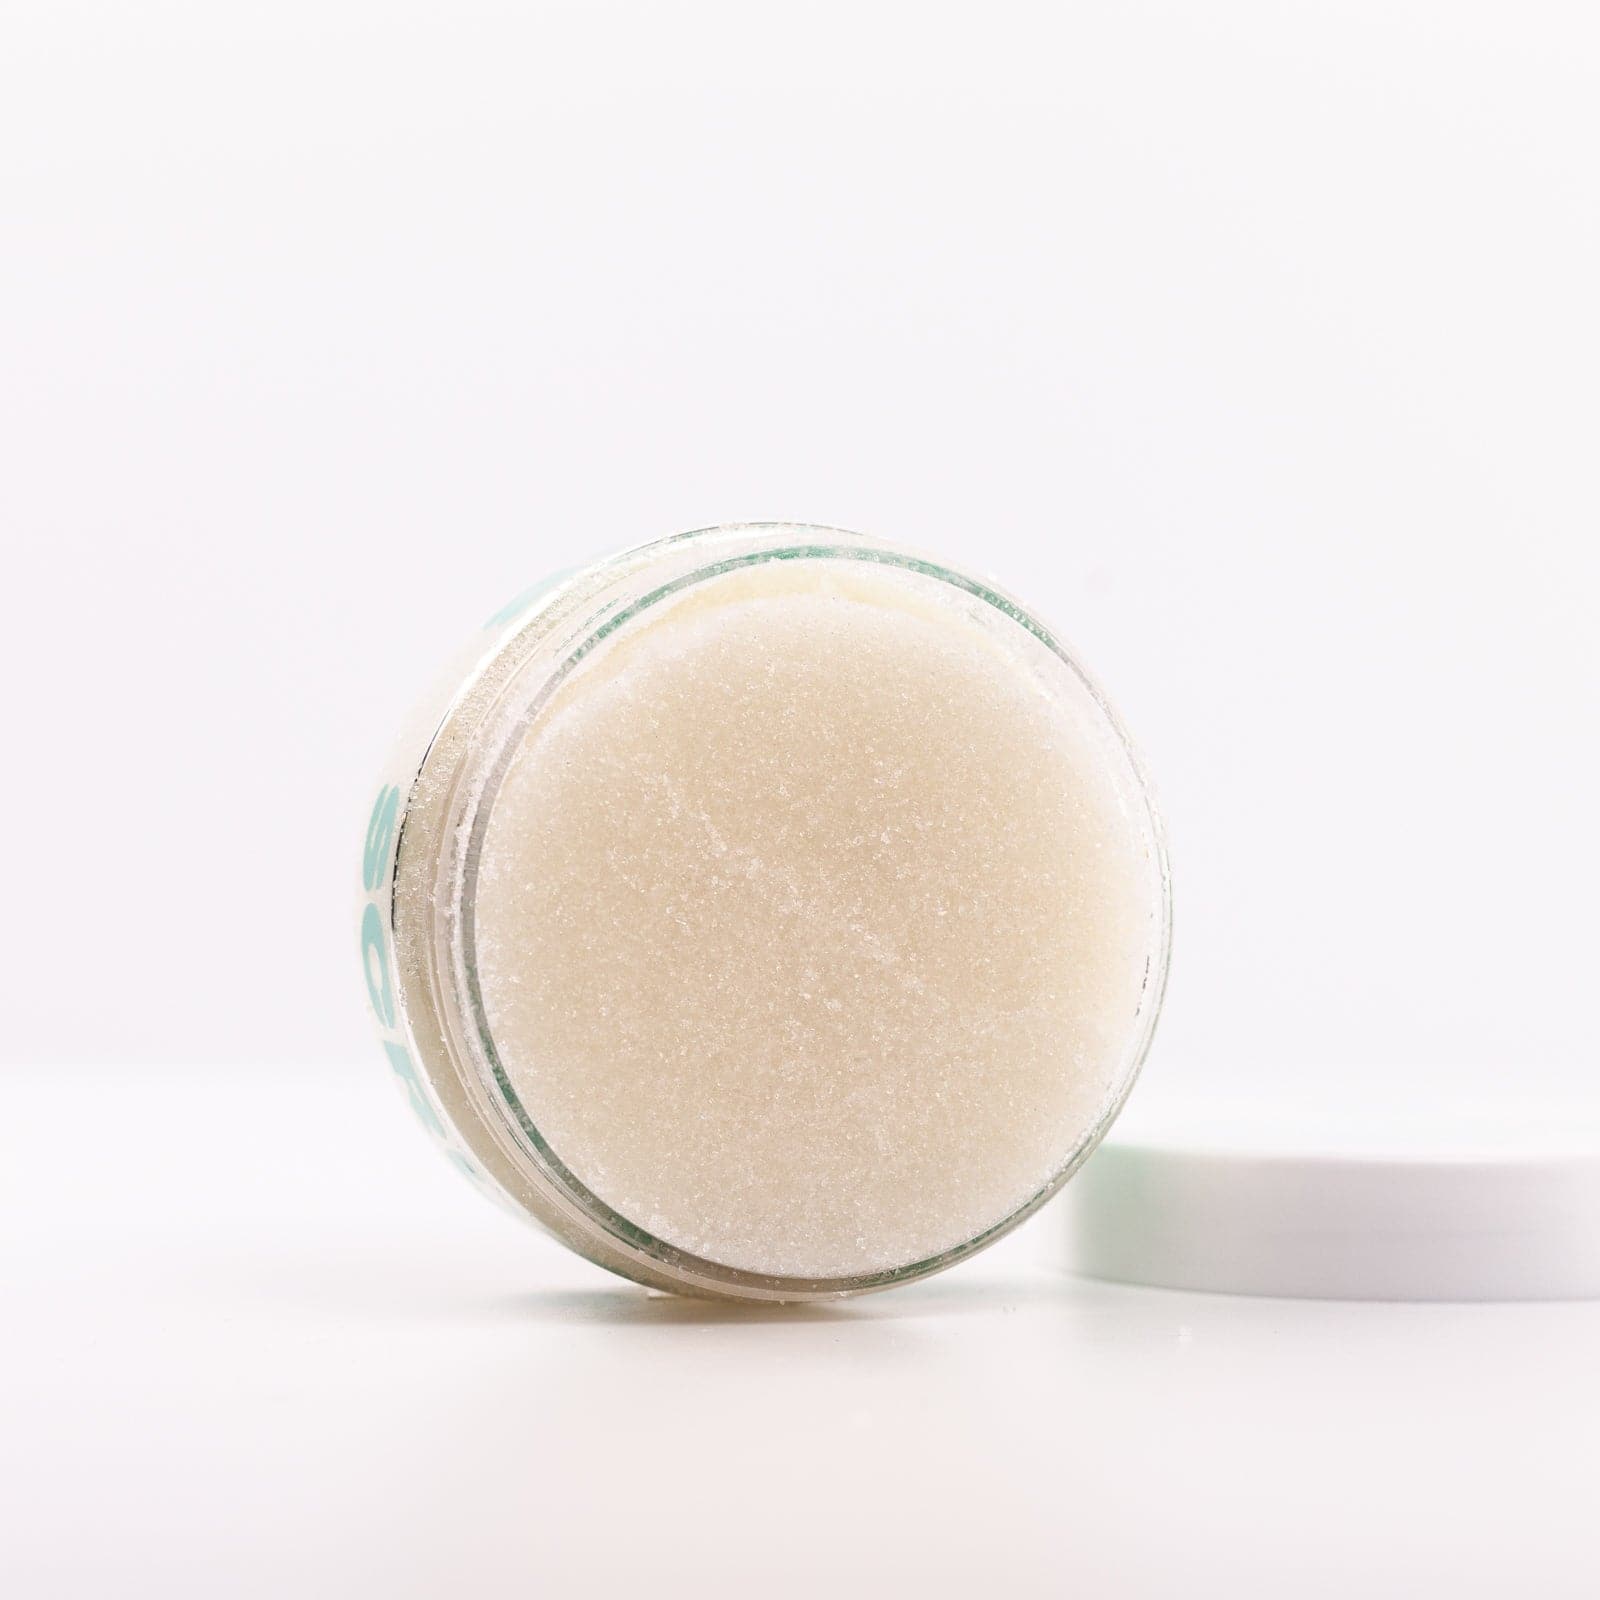 Clear Body Scrub container standing on side with lid off against white background